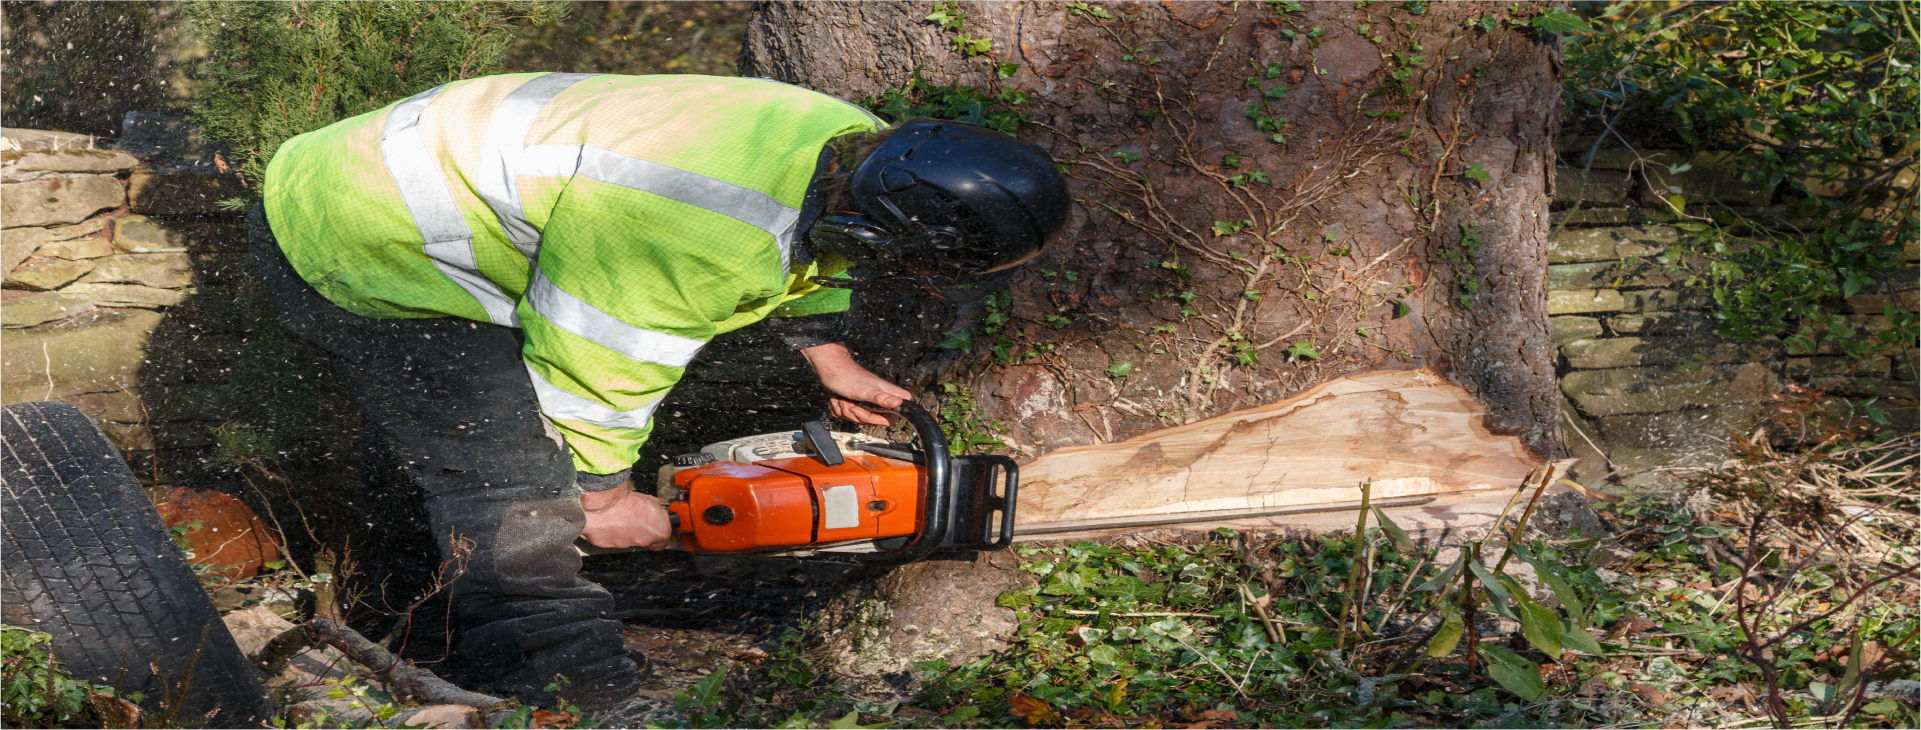 We provide tree removal in tight spaces
services since 2008